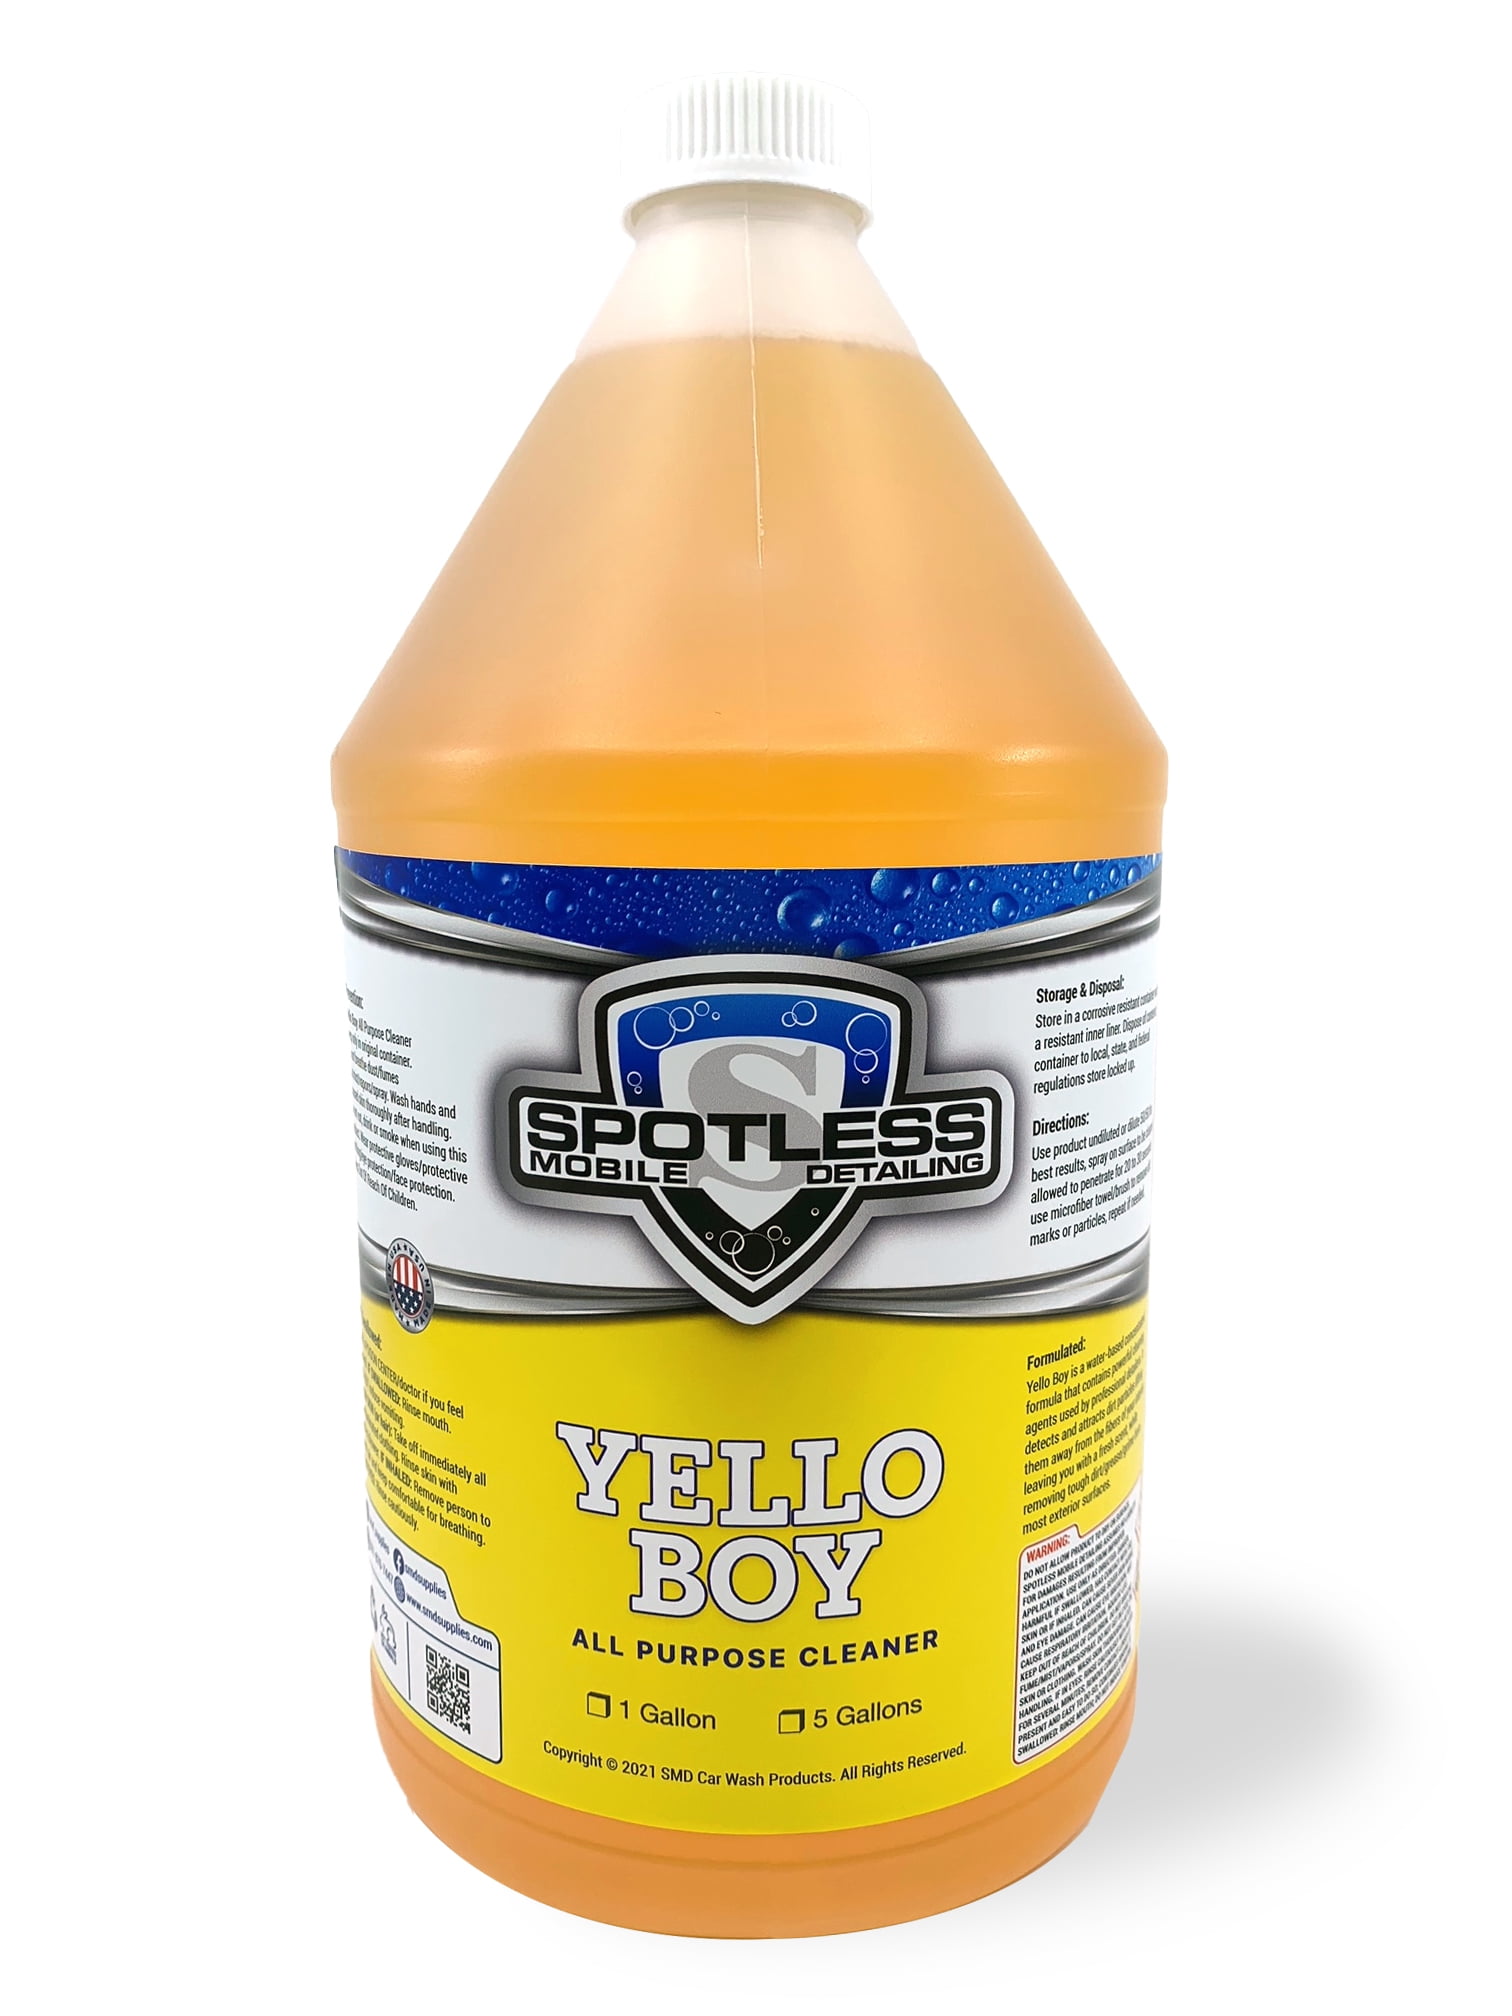 SMD Car Wash Products Yello Boy All Purpose Cleaner, Fresh Scent Concentrated Formula Contains Powerful Cleaning Agents That Detect Dirt Particles, 1